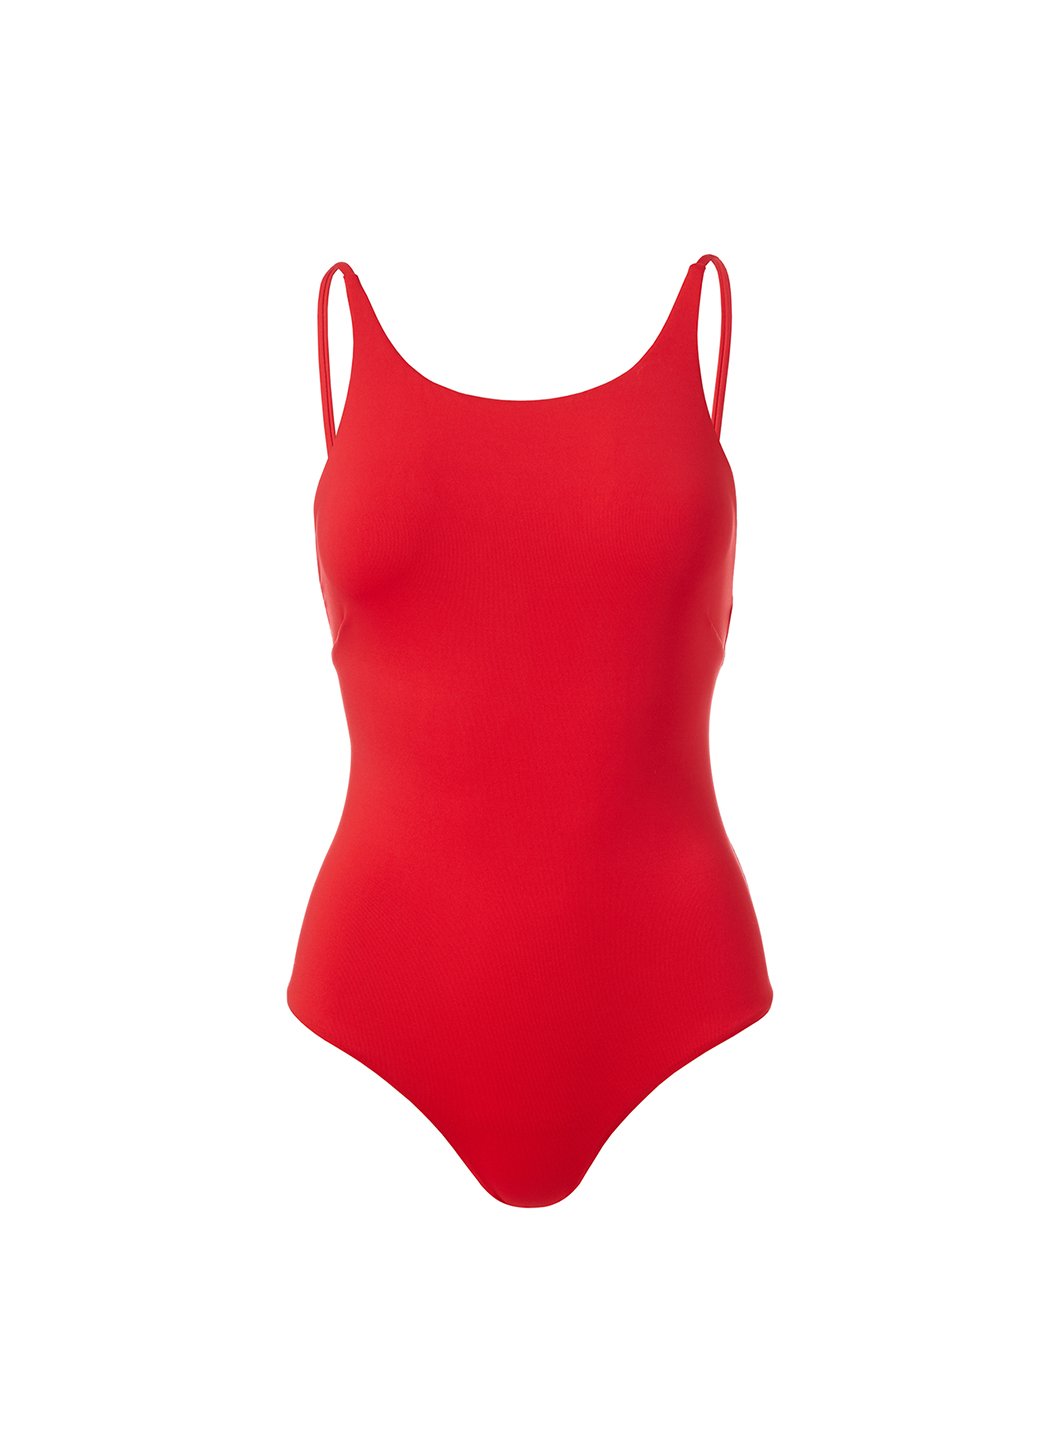 malaga red high neck swimsuit Cutout